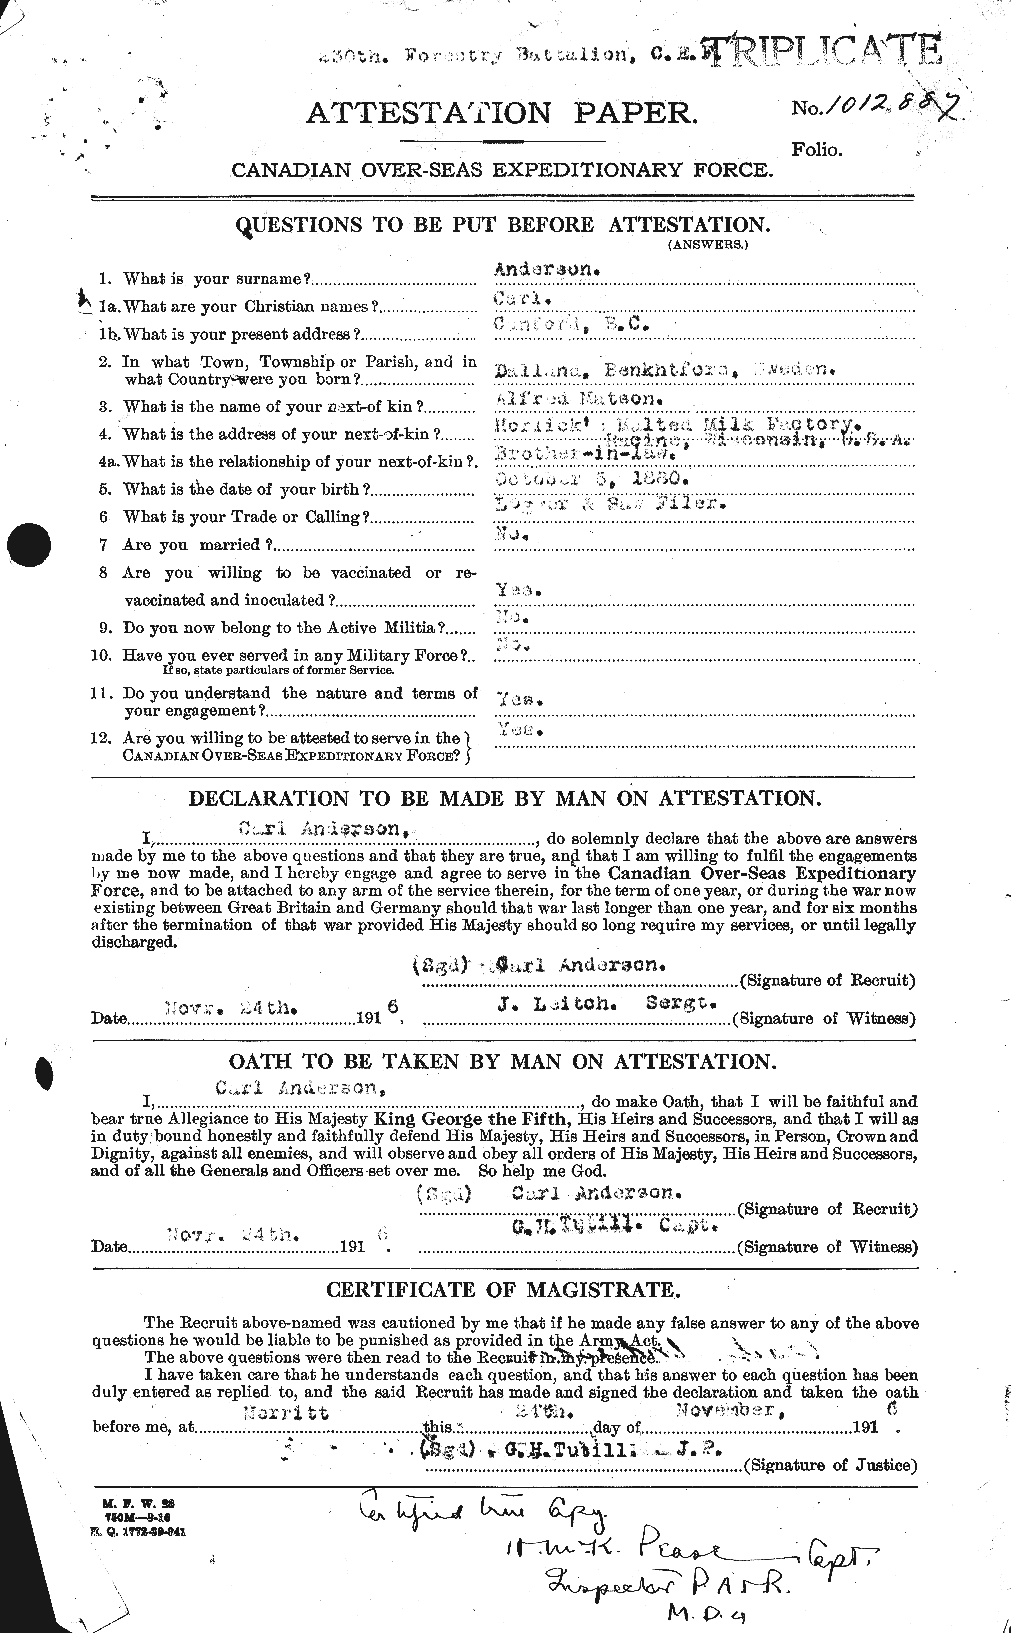 Personnel Records of the First World War - CEF 209292a